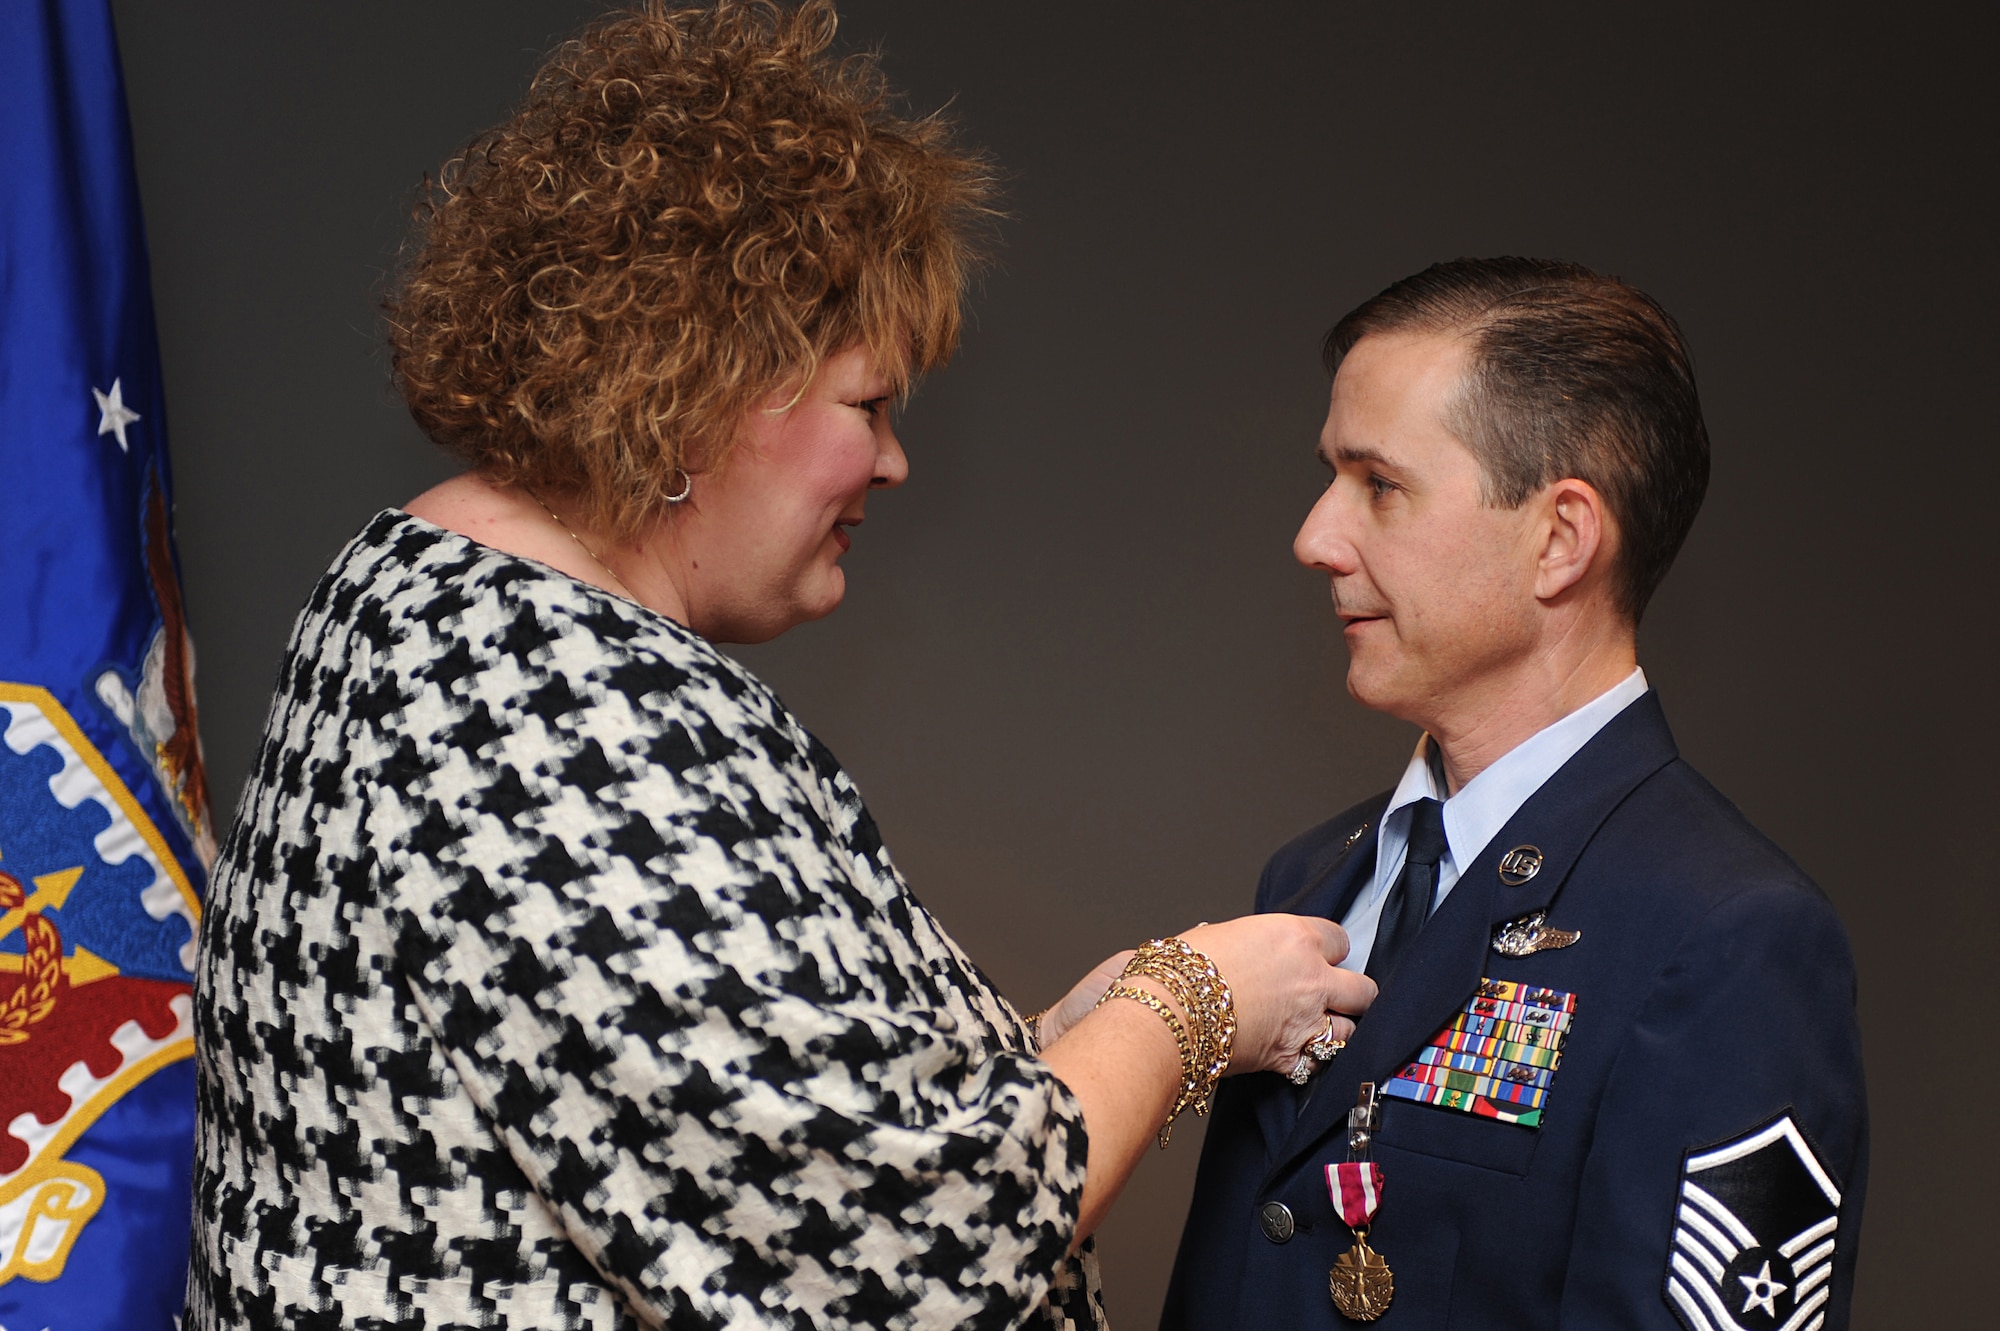 Dorothy Richardson, spouse of Master Sgt. Peter Richardson, pins a retirement pin on her husband during his retirement ceremony in the U.S. Air Force Expeditionary Center on Fort Dix, N.J., Jan. 9, 2009.  Sergeant Richardson was a command tactician for the Combat Aircrew Tactics Studies Course.  He was then selected to fulfill the position of course director for the CATS Course in his last years at the Expeditionary Center. (U.S. Air Force Photo/Staff Sgt. Nathan Bevier)